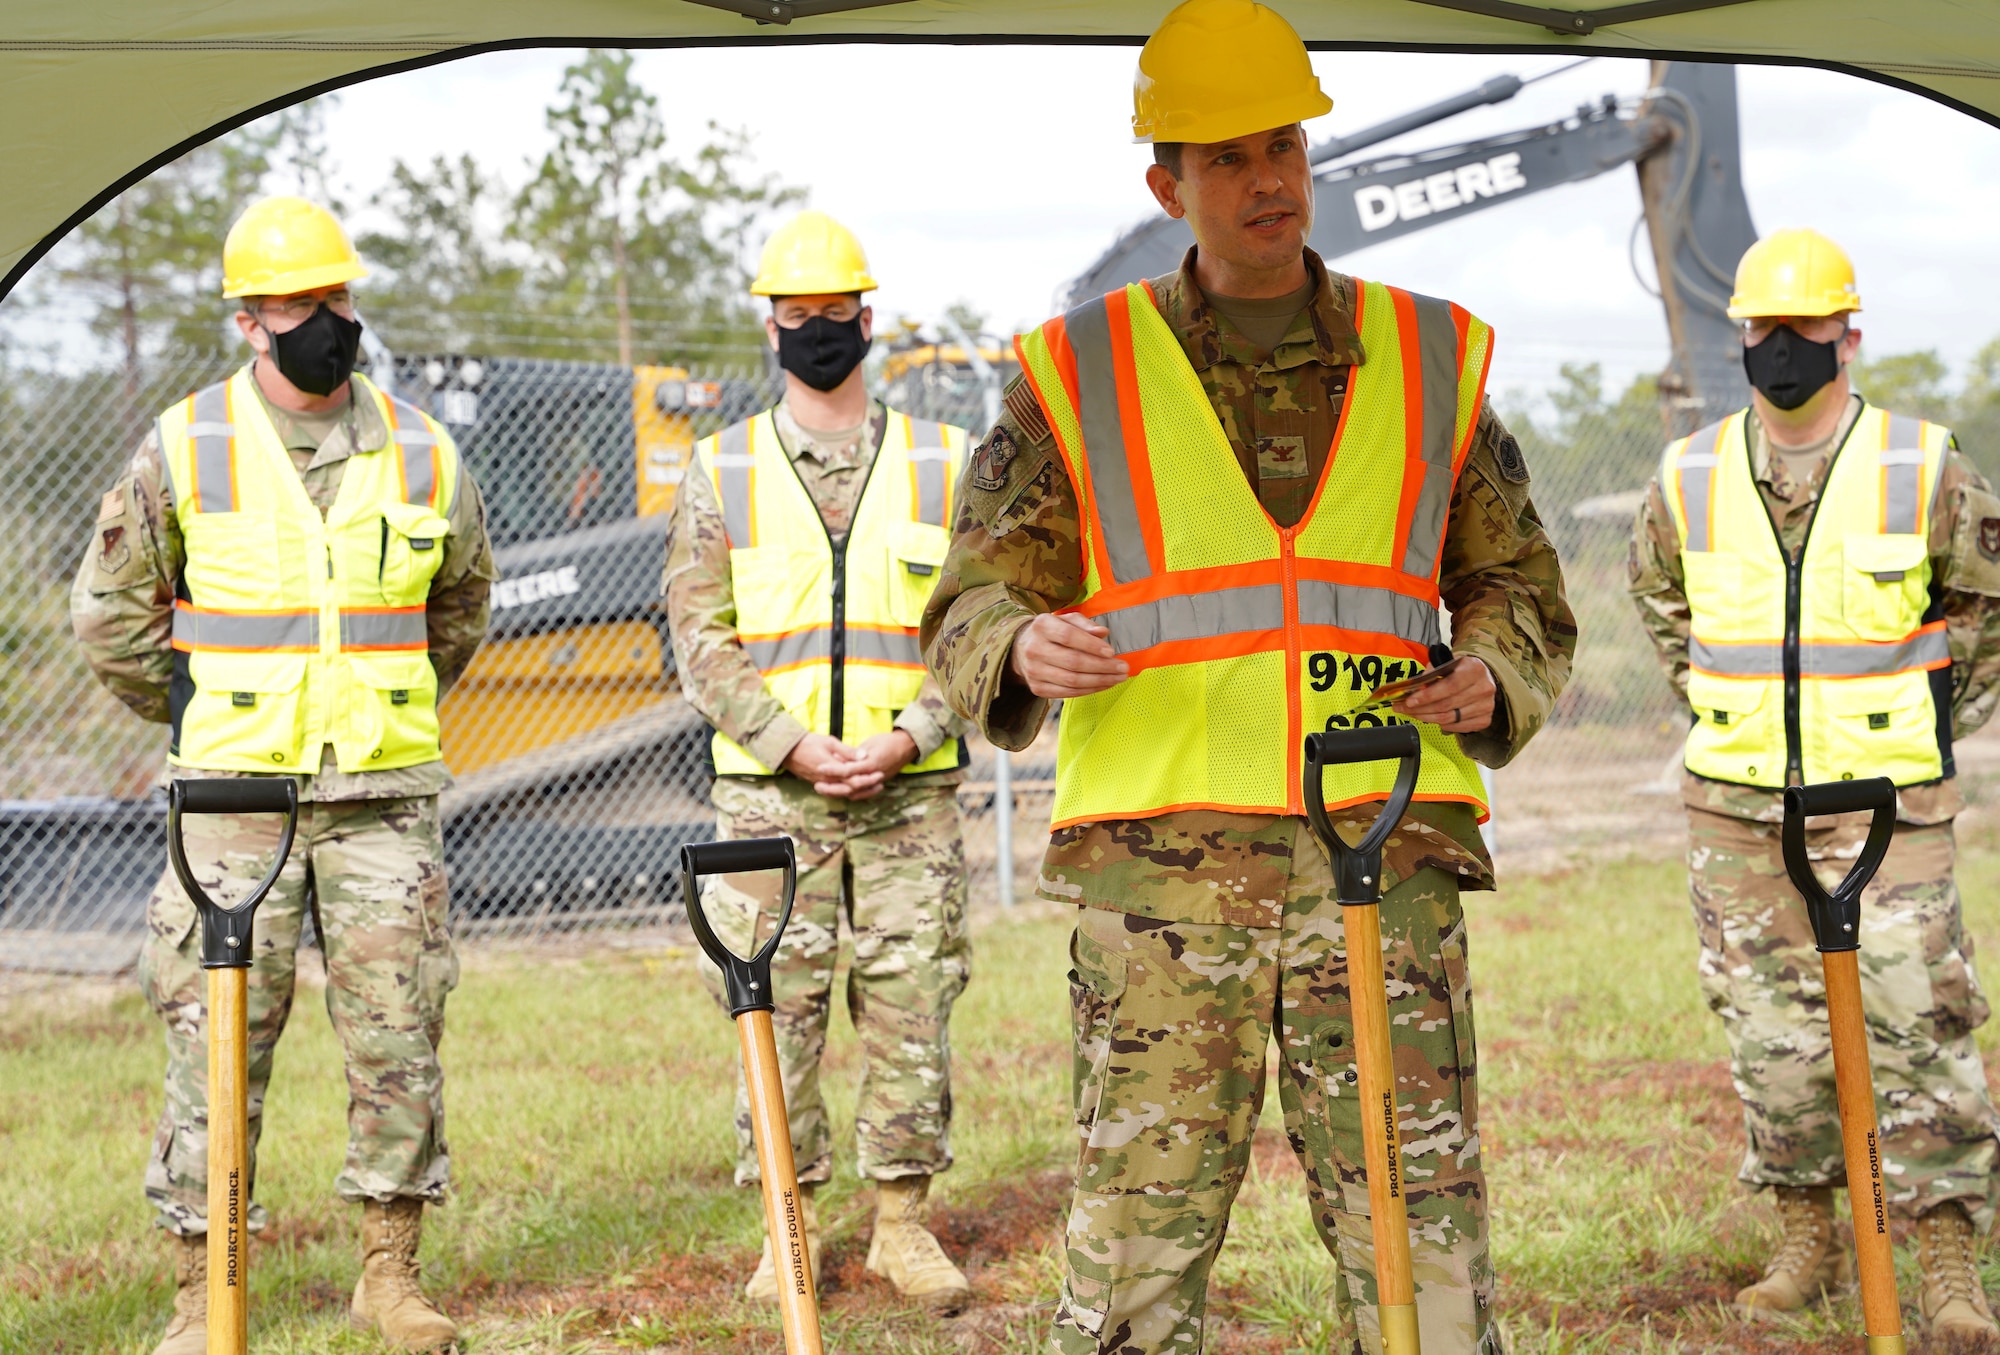 Photo of 919 SOW commander standing next to a shovel while speaking